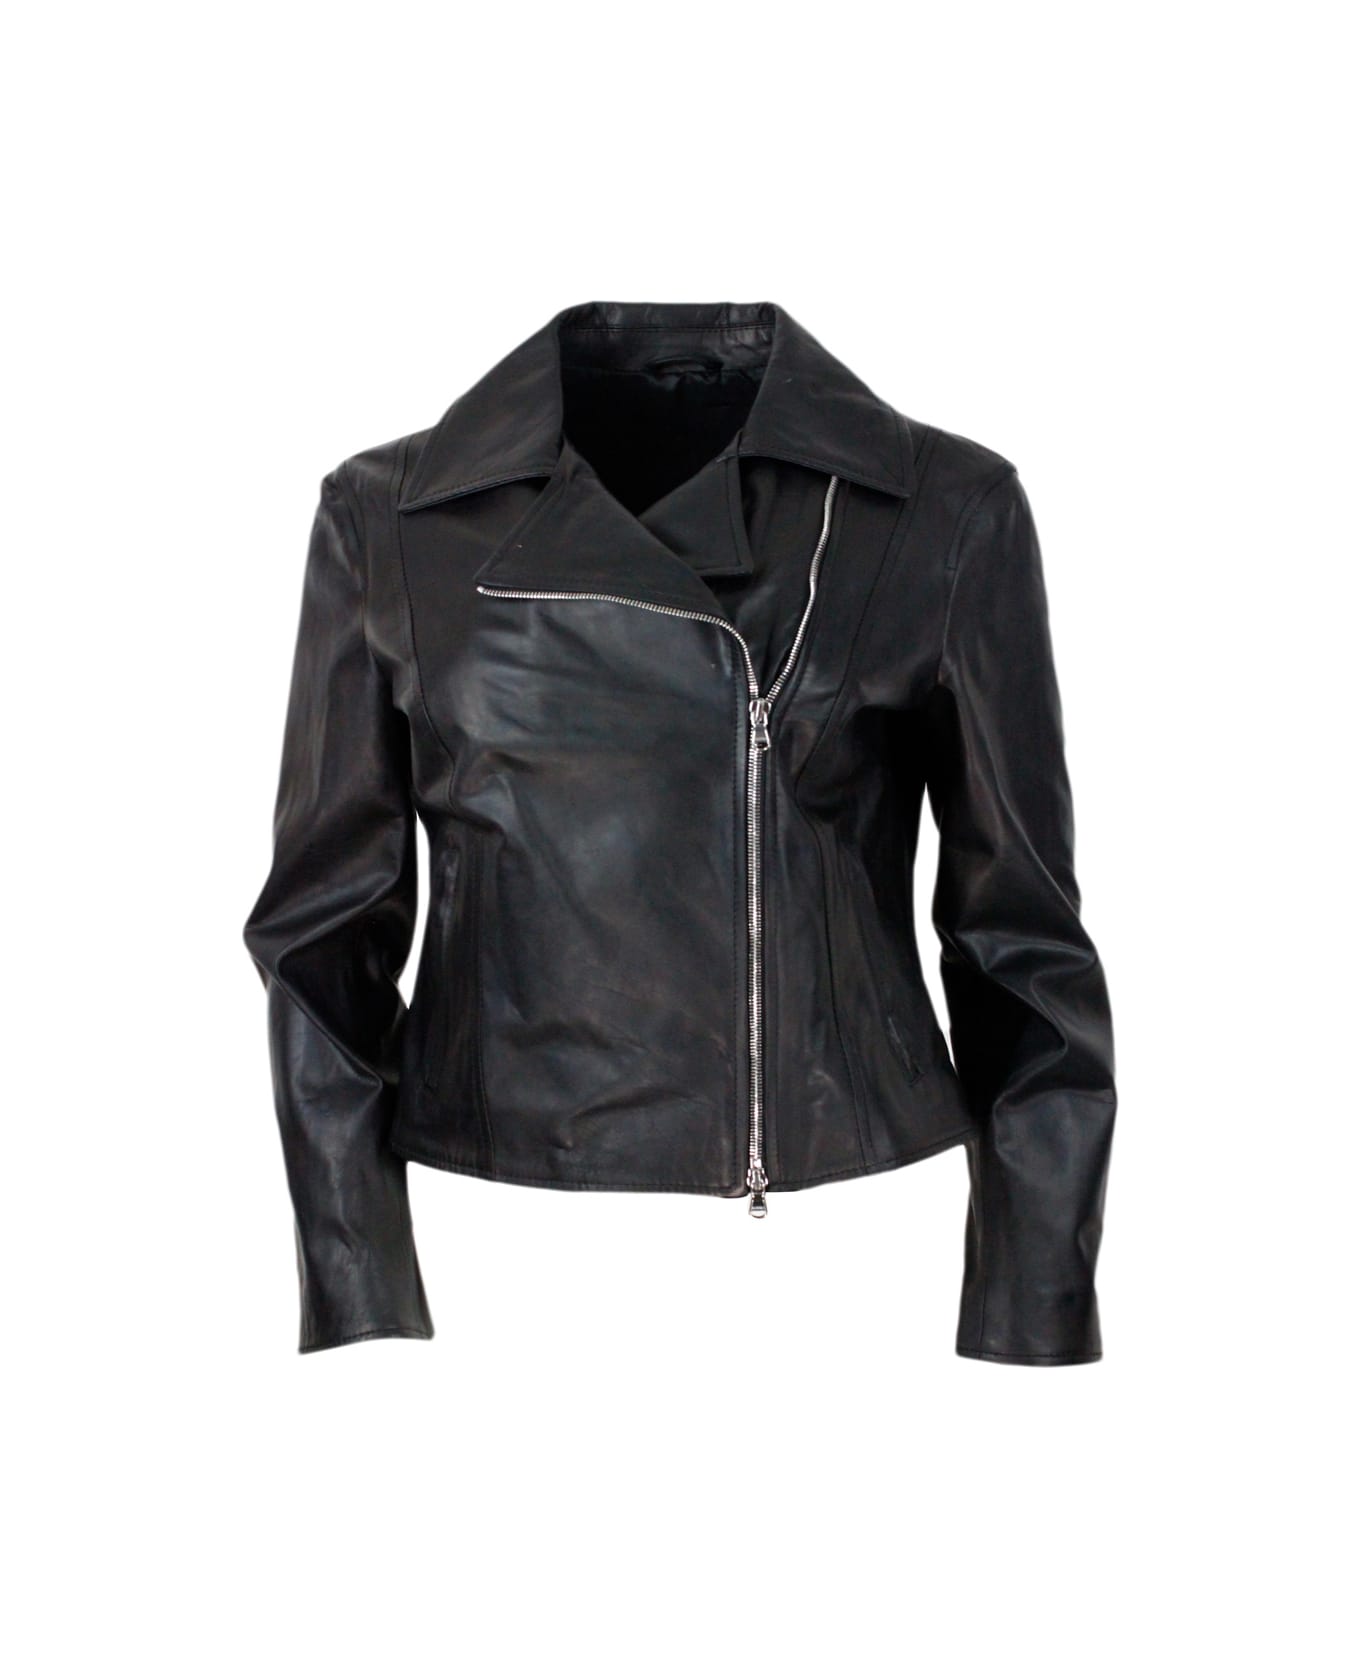 Barba Napoli Studded Jacket In Fine And Soft Nappa Leather With Zip Closure - Black